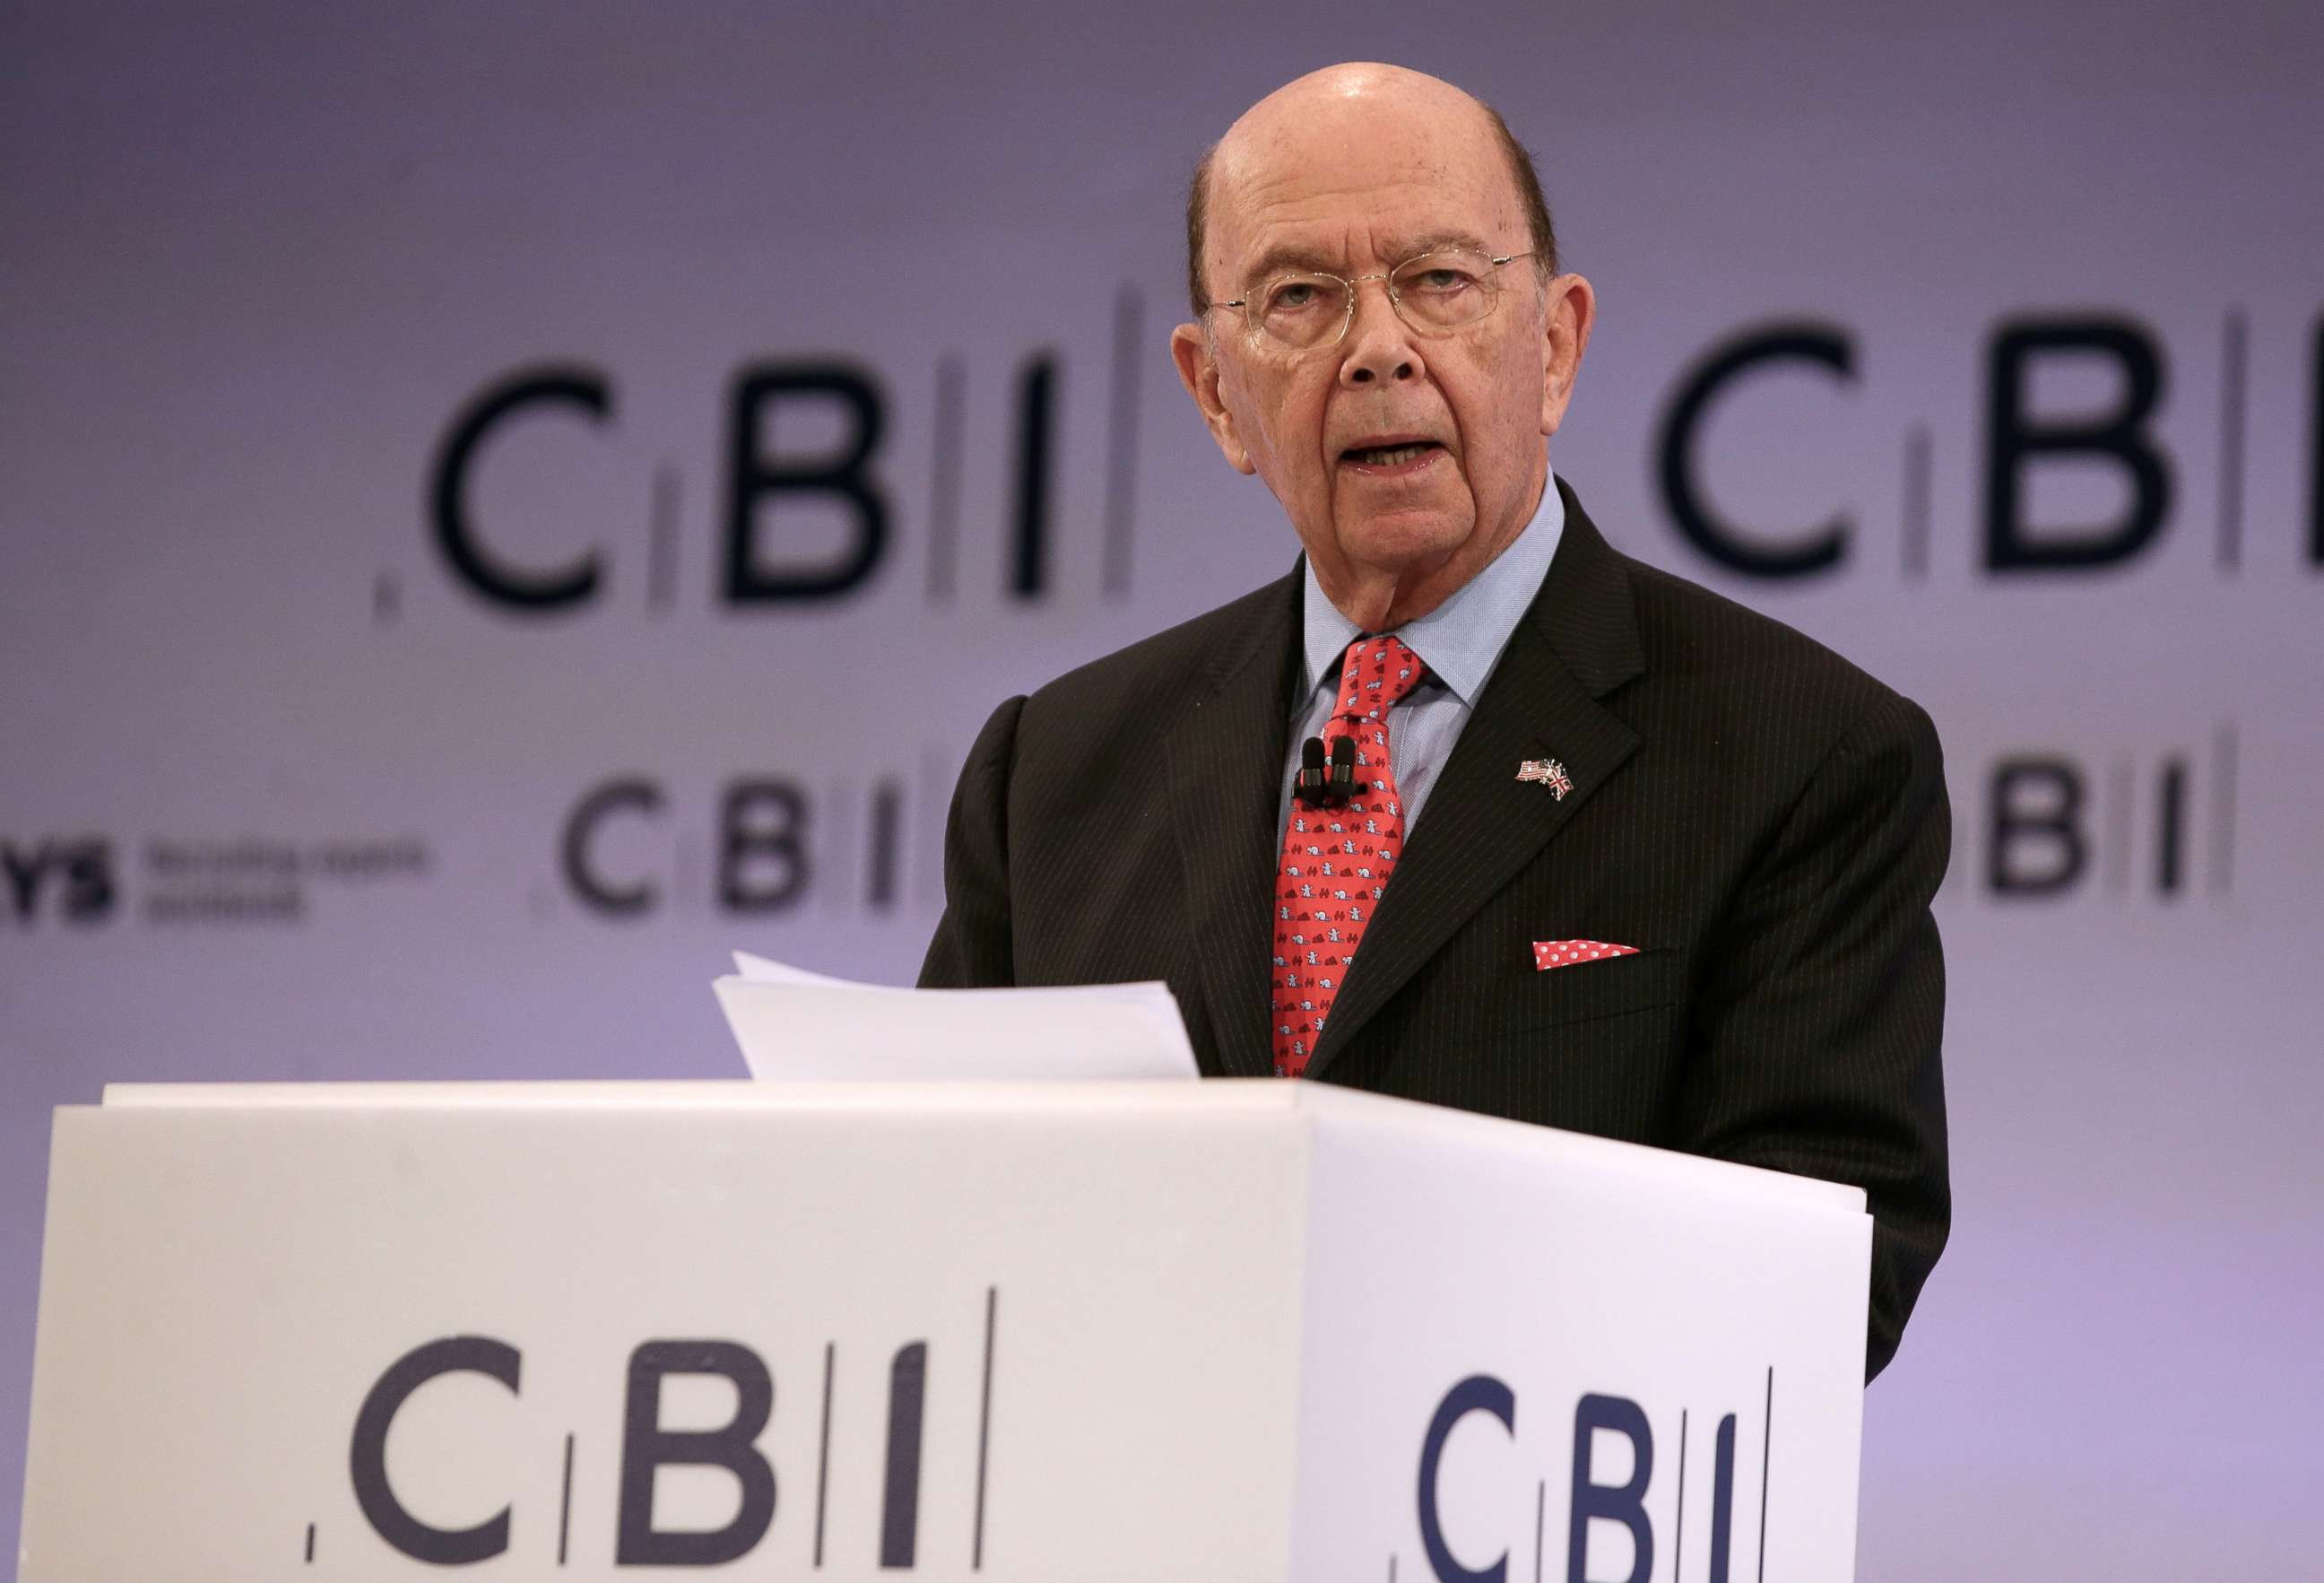 PHOTO: U.S. Secretary of Commerce, Wilbur Ross addresses delegates at the annual Confederation of British Industry (CBI) conference in east London, Nov. 6, 6, 2017.